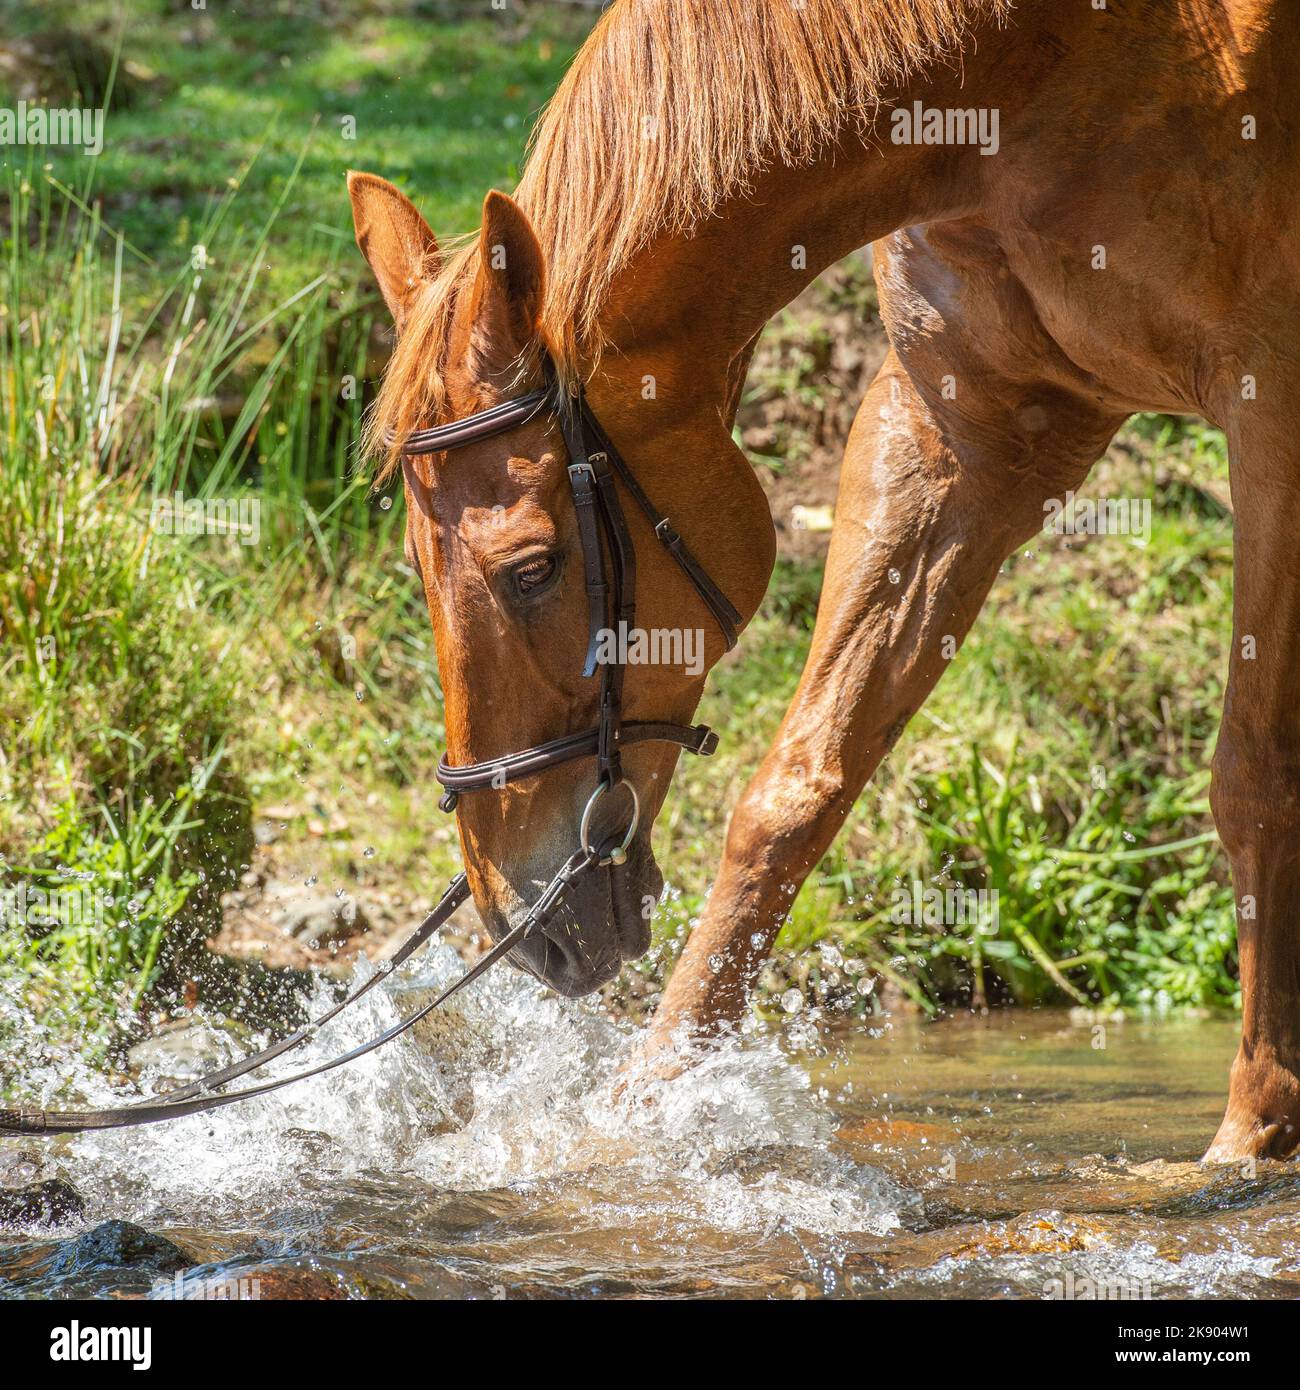 horse pawing at water Stock Photo